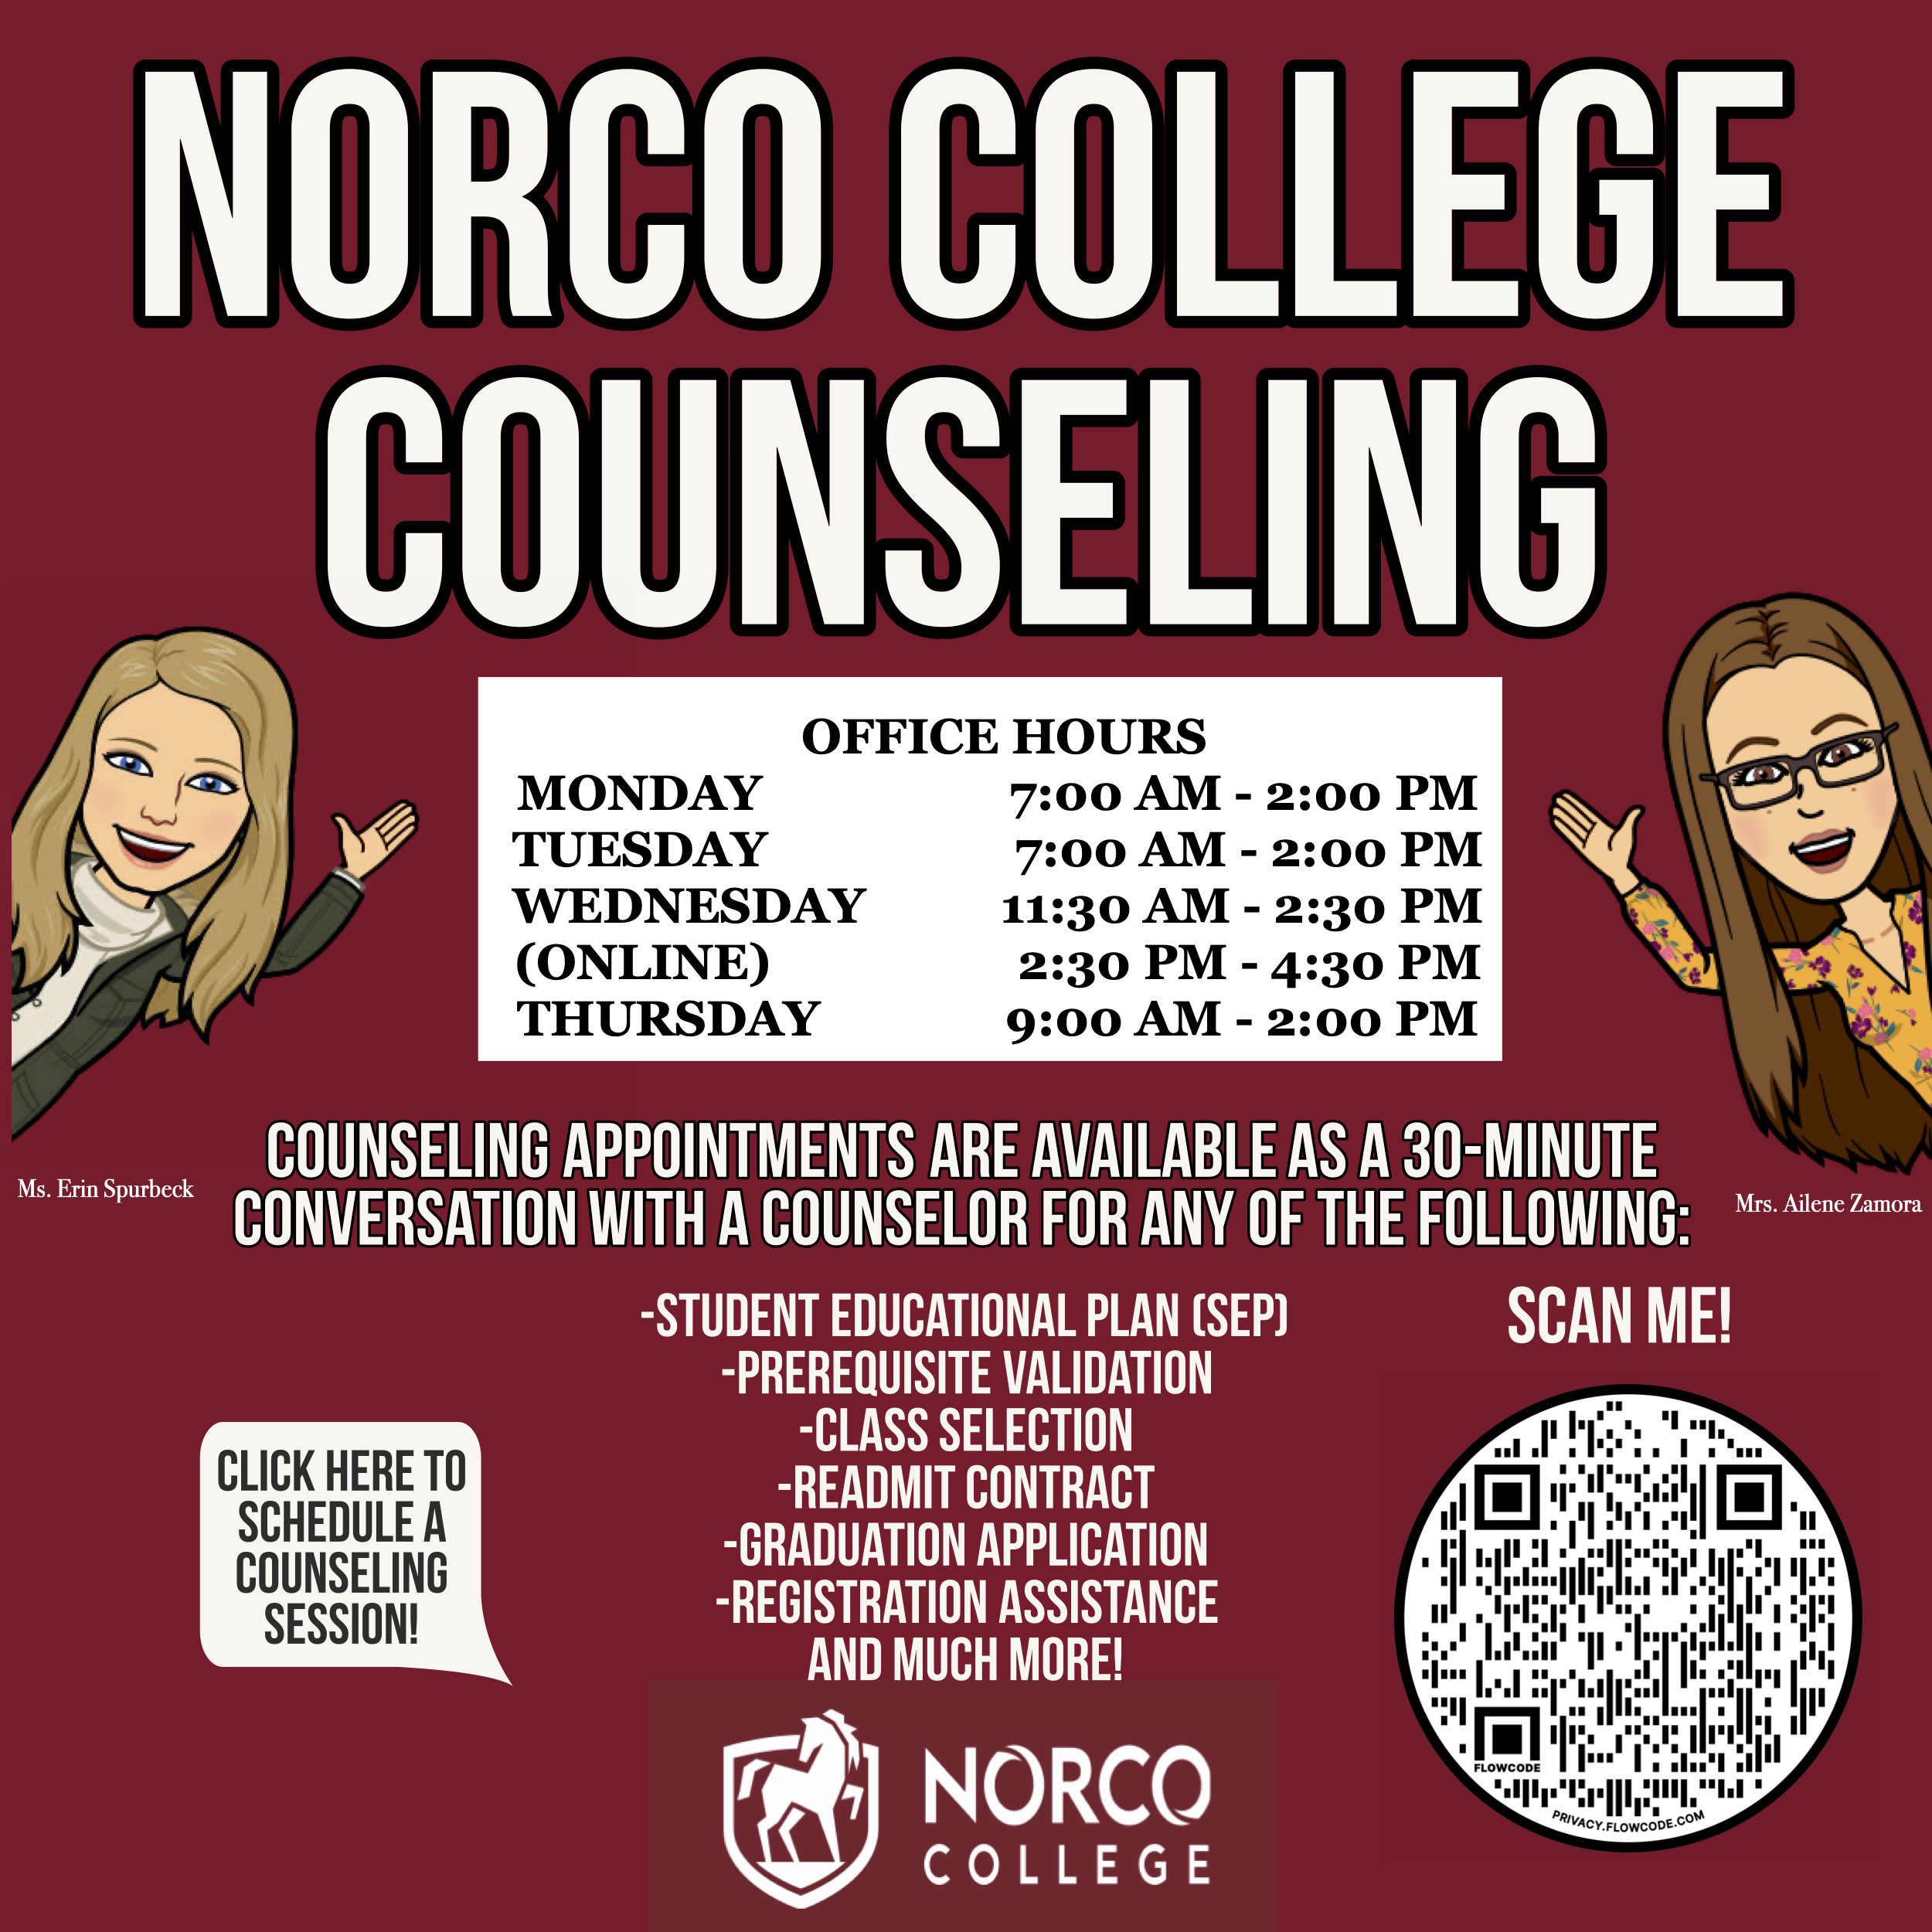 Norco College Counseling Office Hours